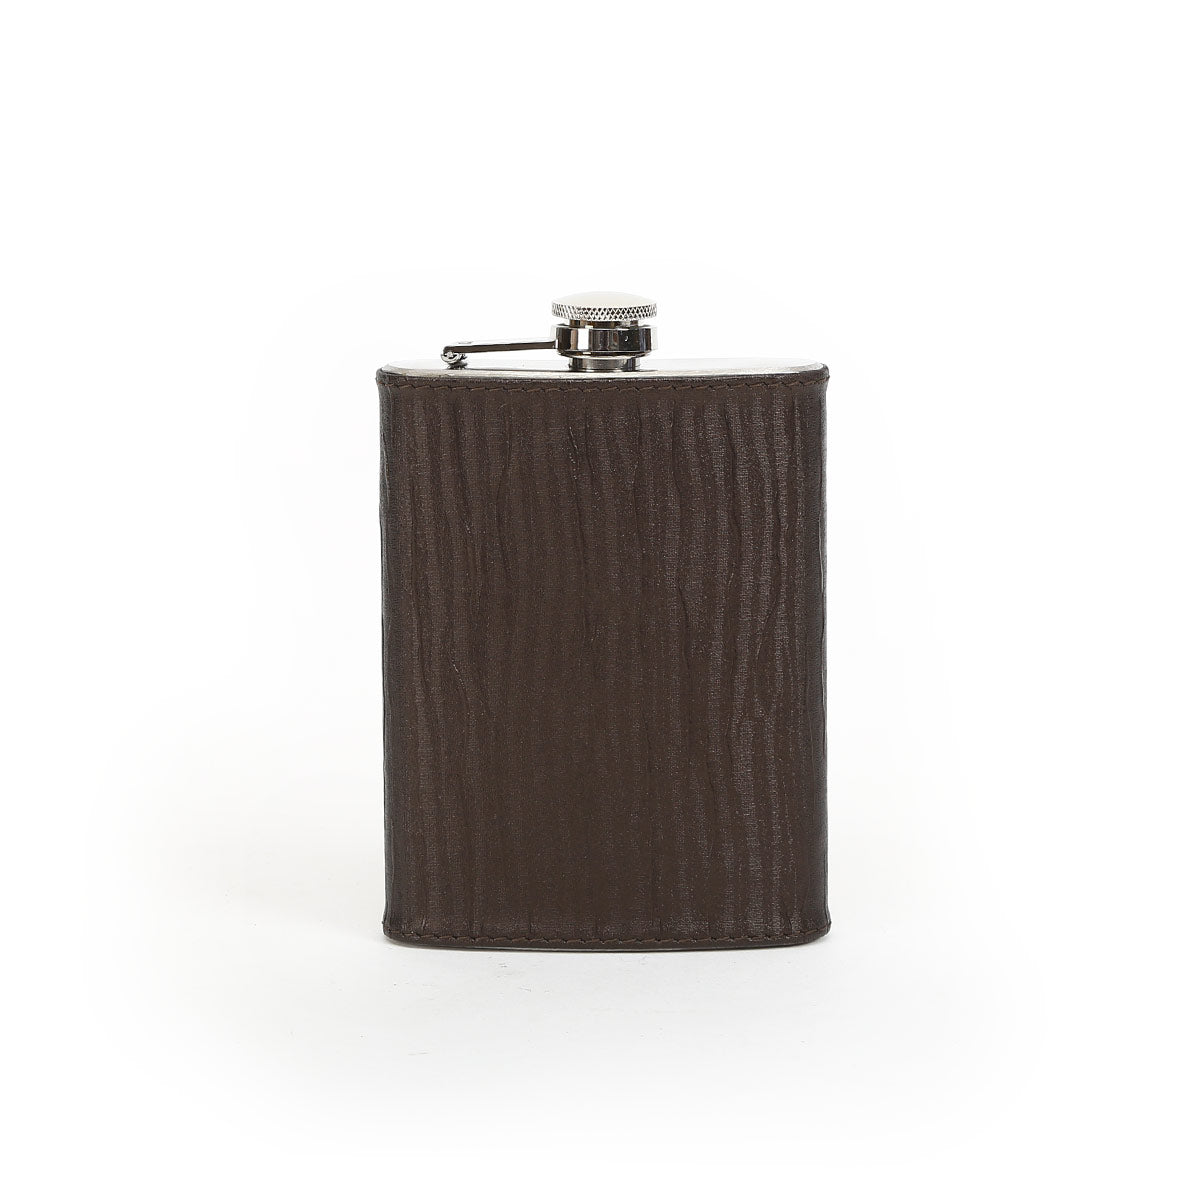 Hip Flask With Brown Leather Sheath